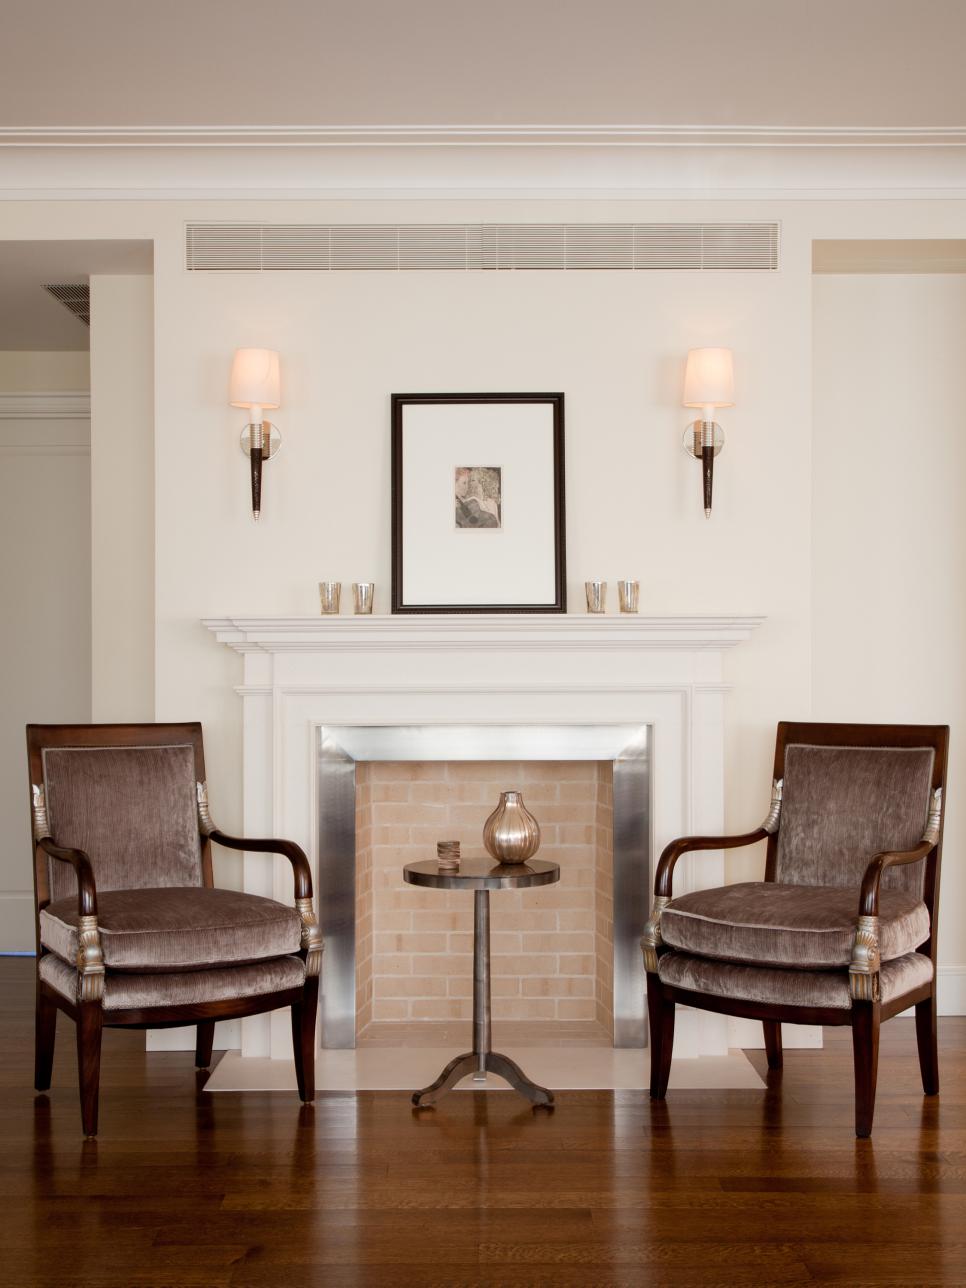 Brick Fireplace Flanked by Velvet Chairs & Sconces